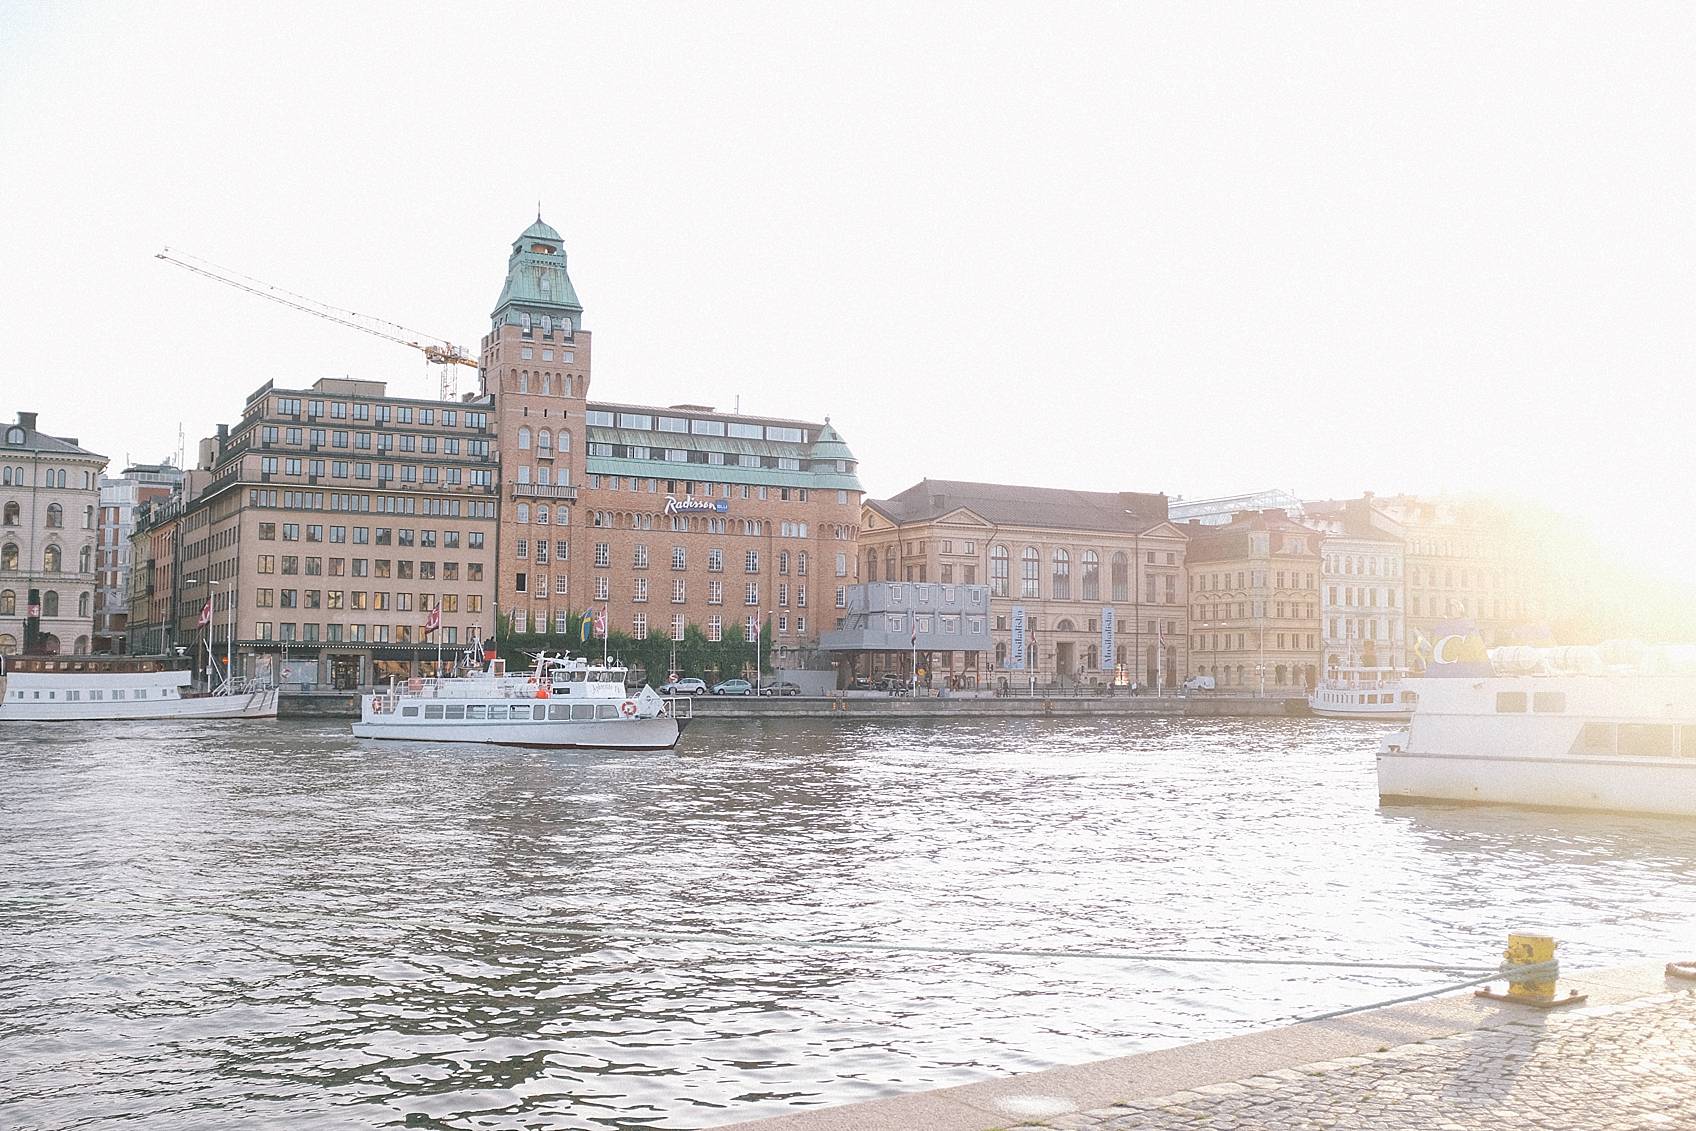 Photo tour of Stockholm: by the ocean ships